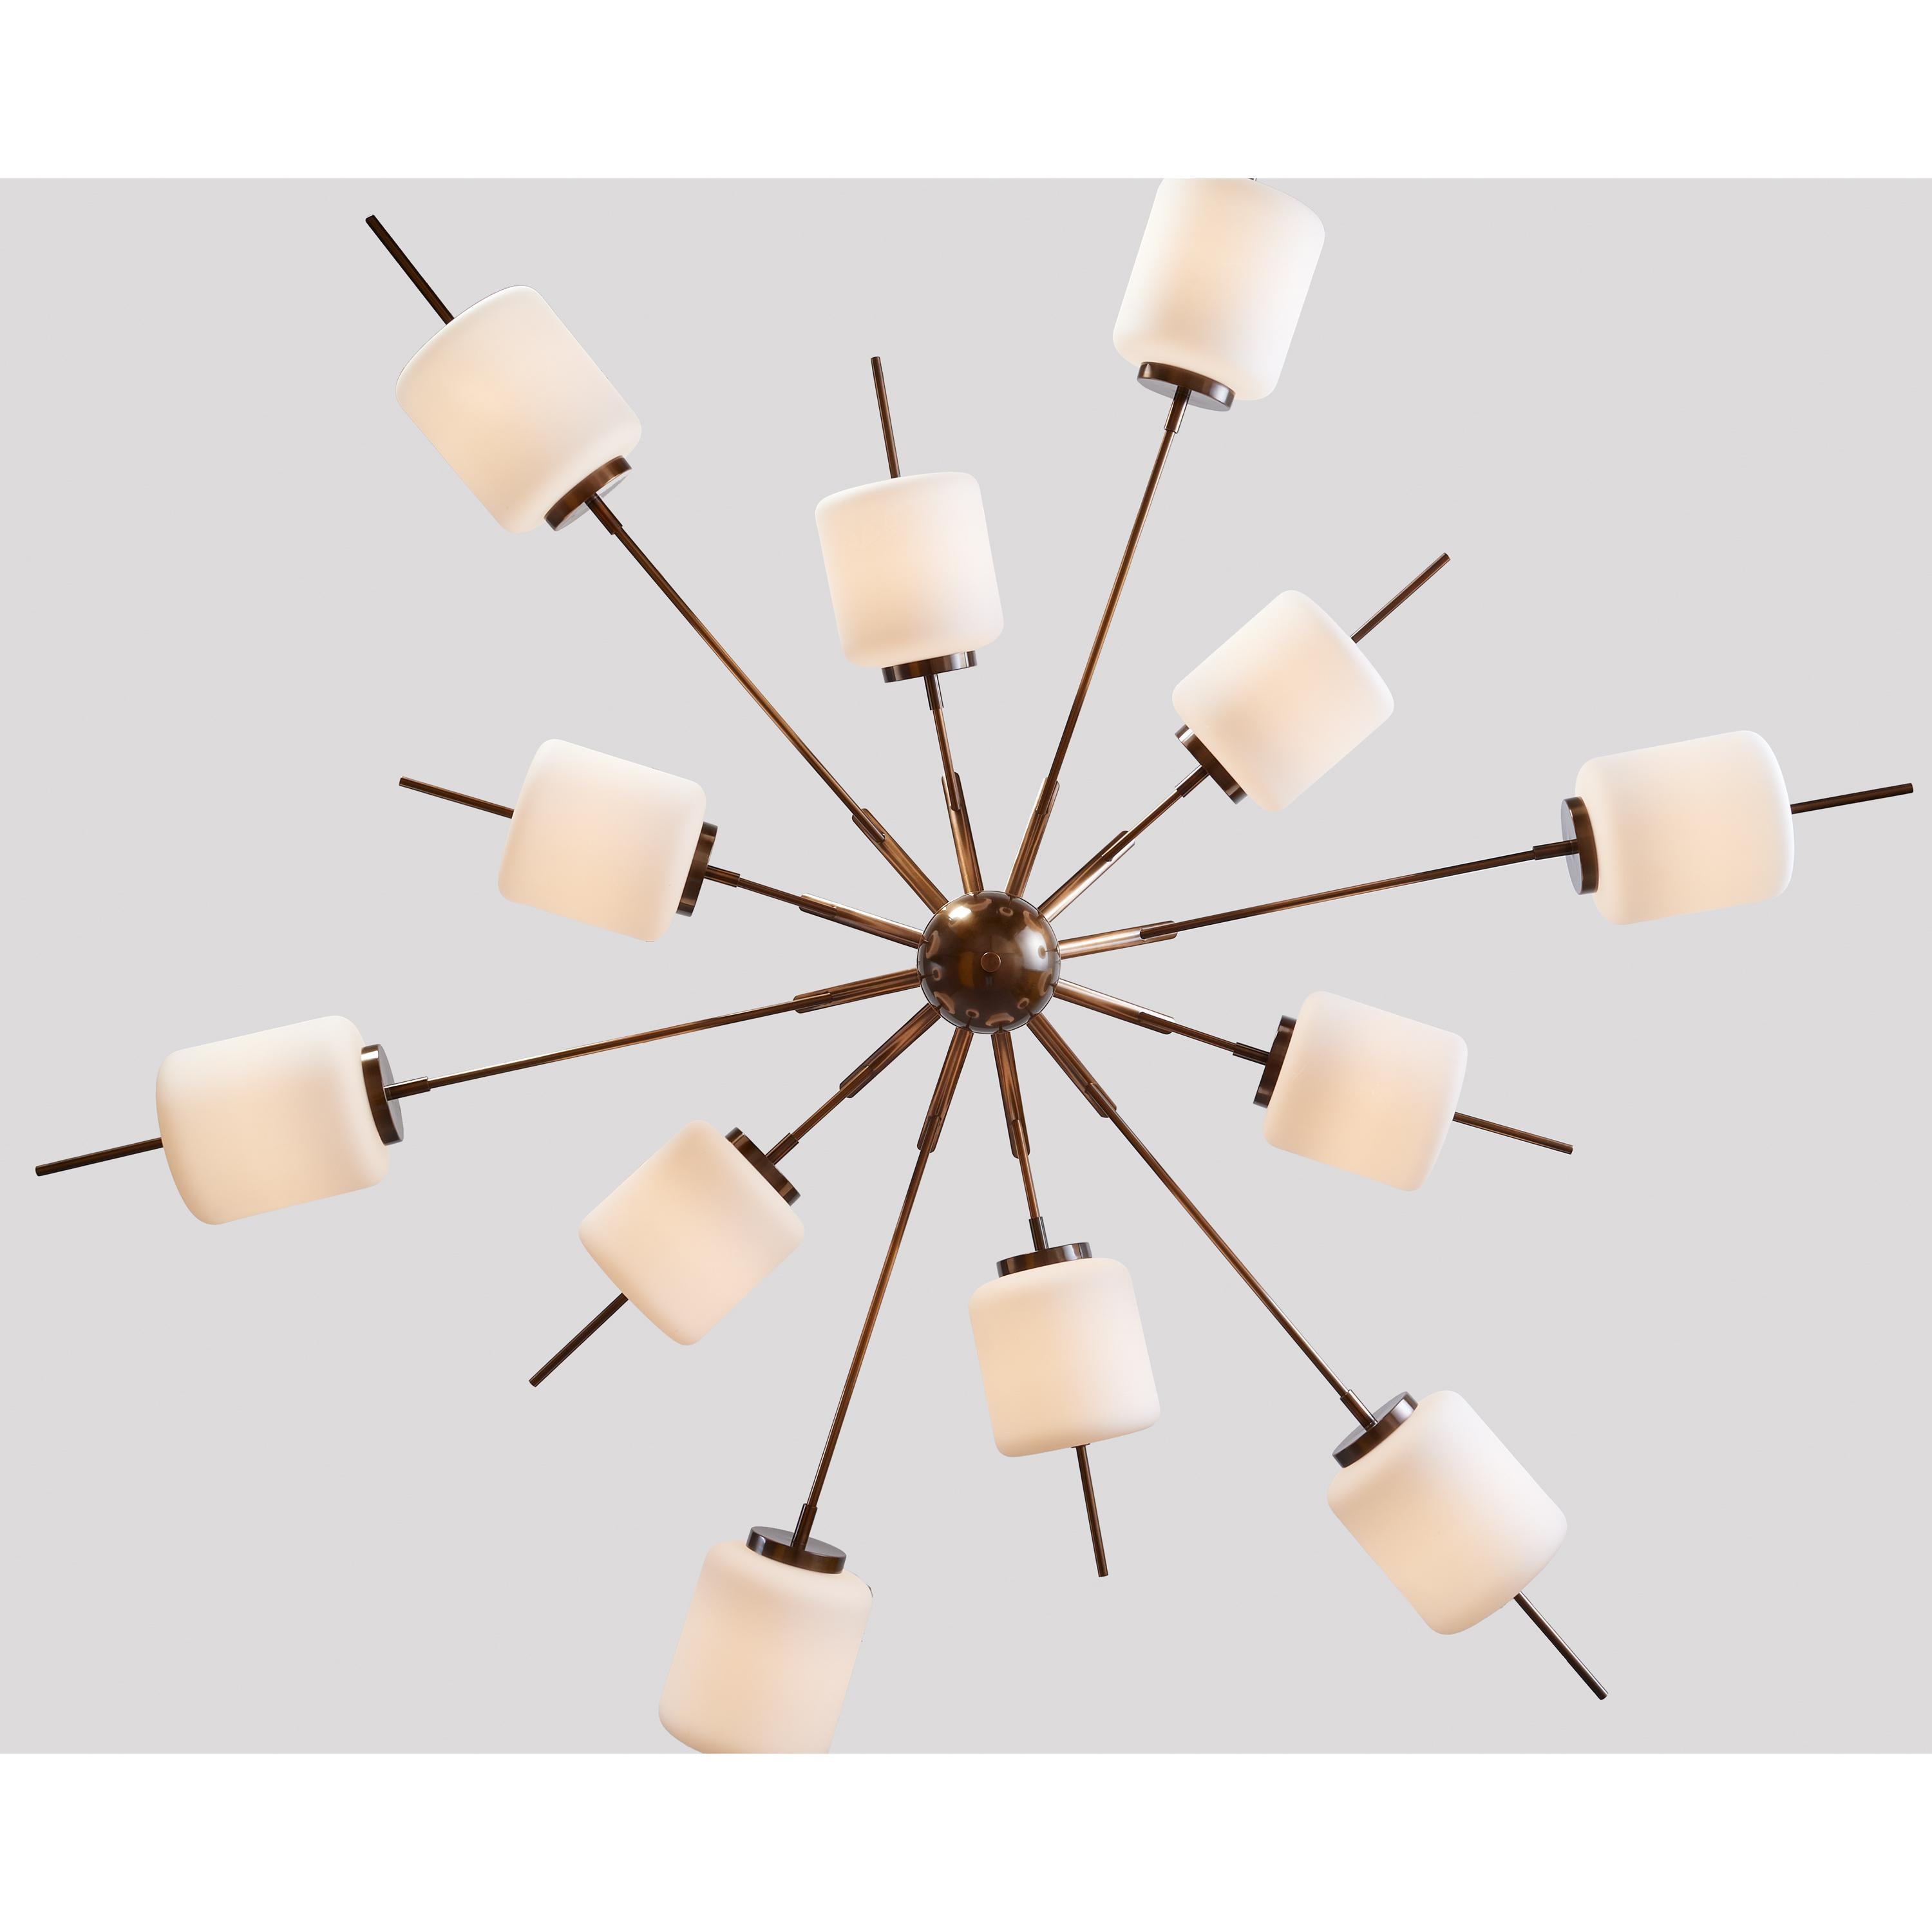 Monumental Chandelier with Twelve Arms and White Glass Shades, Italy 1960s For Sale 1